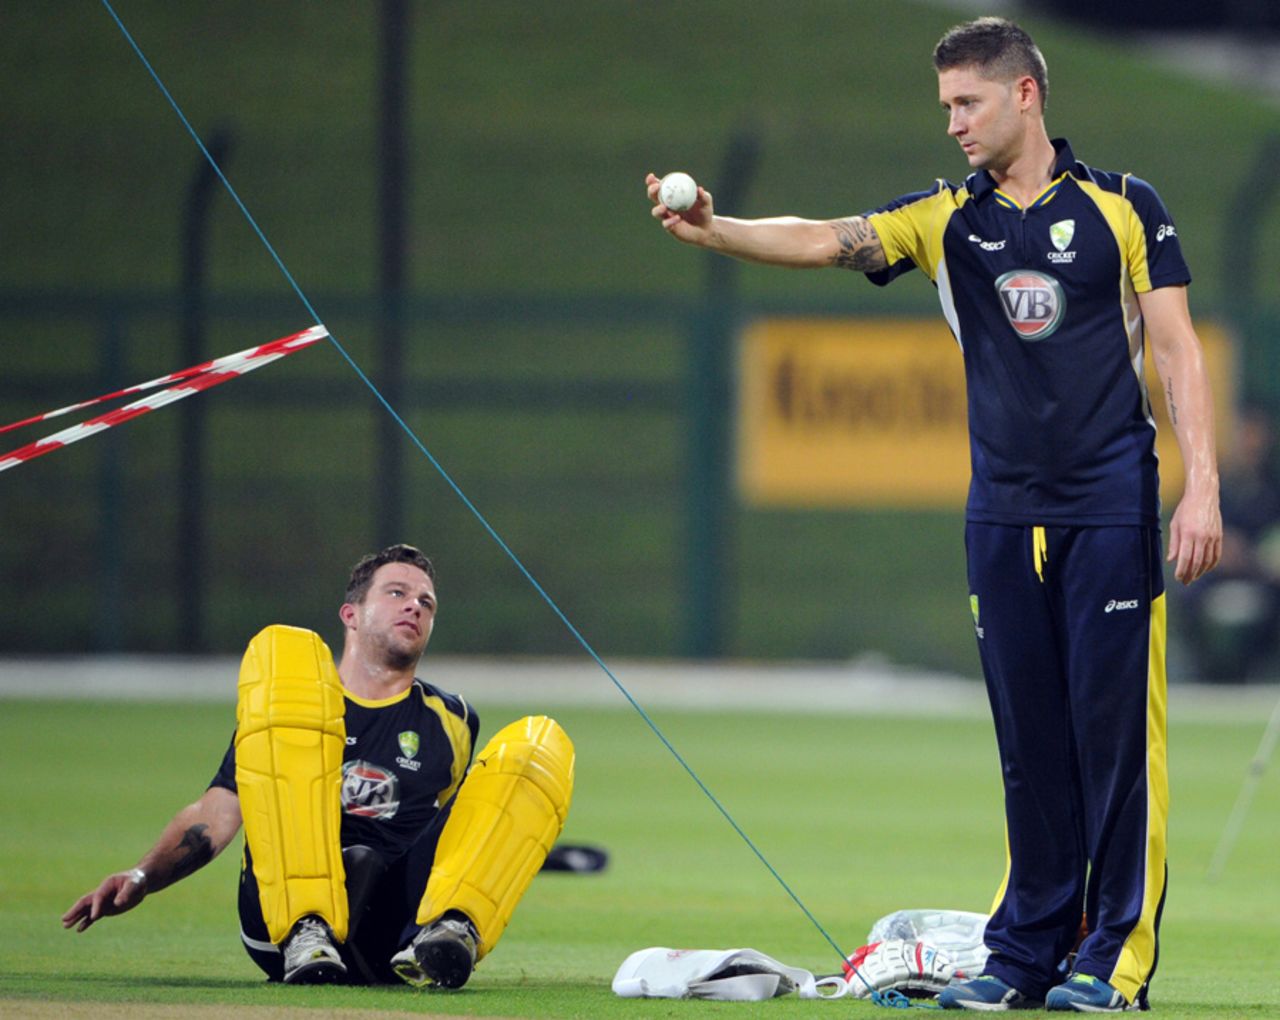 Michael Clarke and Matthew Wade chat during training, Abu Dhabi, August 30, 2012